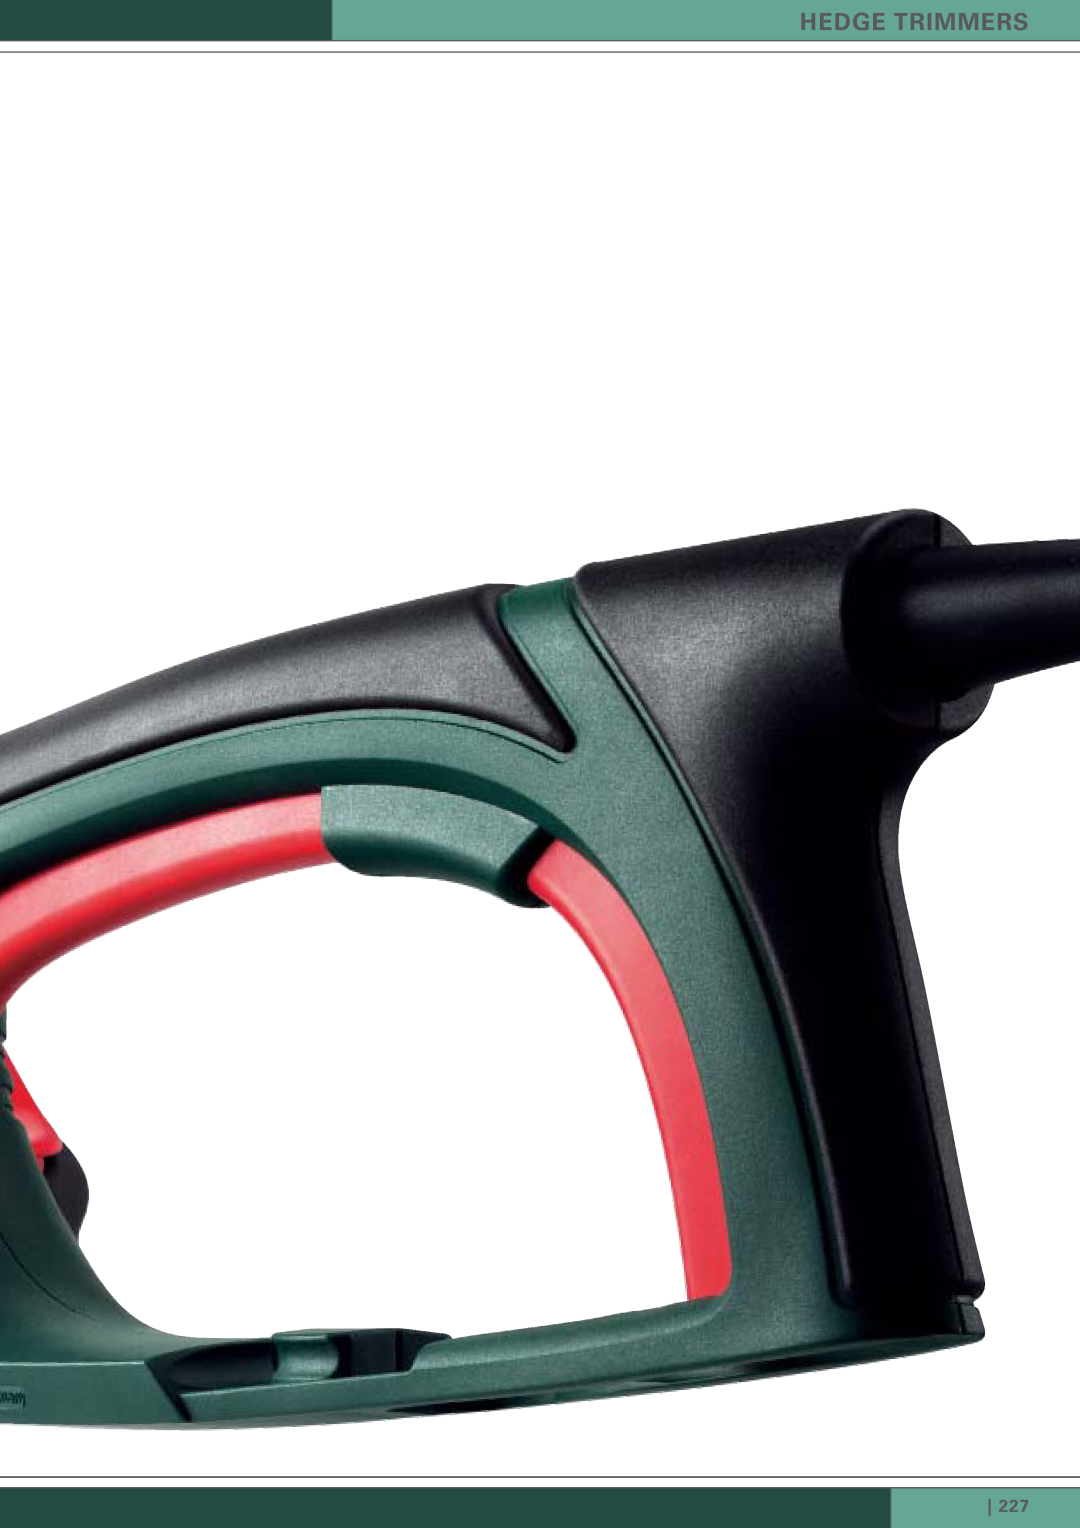 Metabo HS-8555, HS-8655 Quick, HS-8675 Quick, HS-8565, HS-8545, HS-8665 Quick manual Hedge Trimmers 